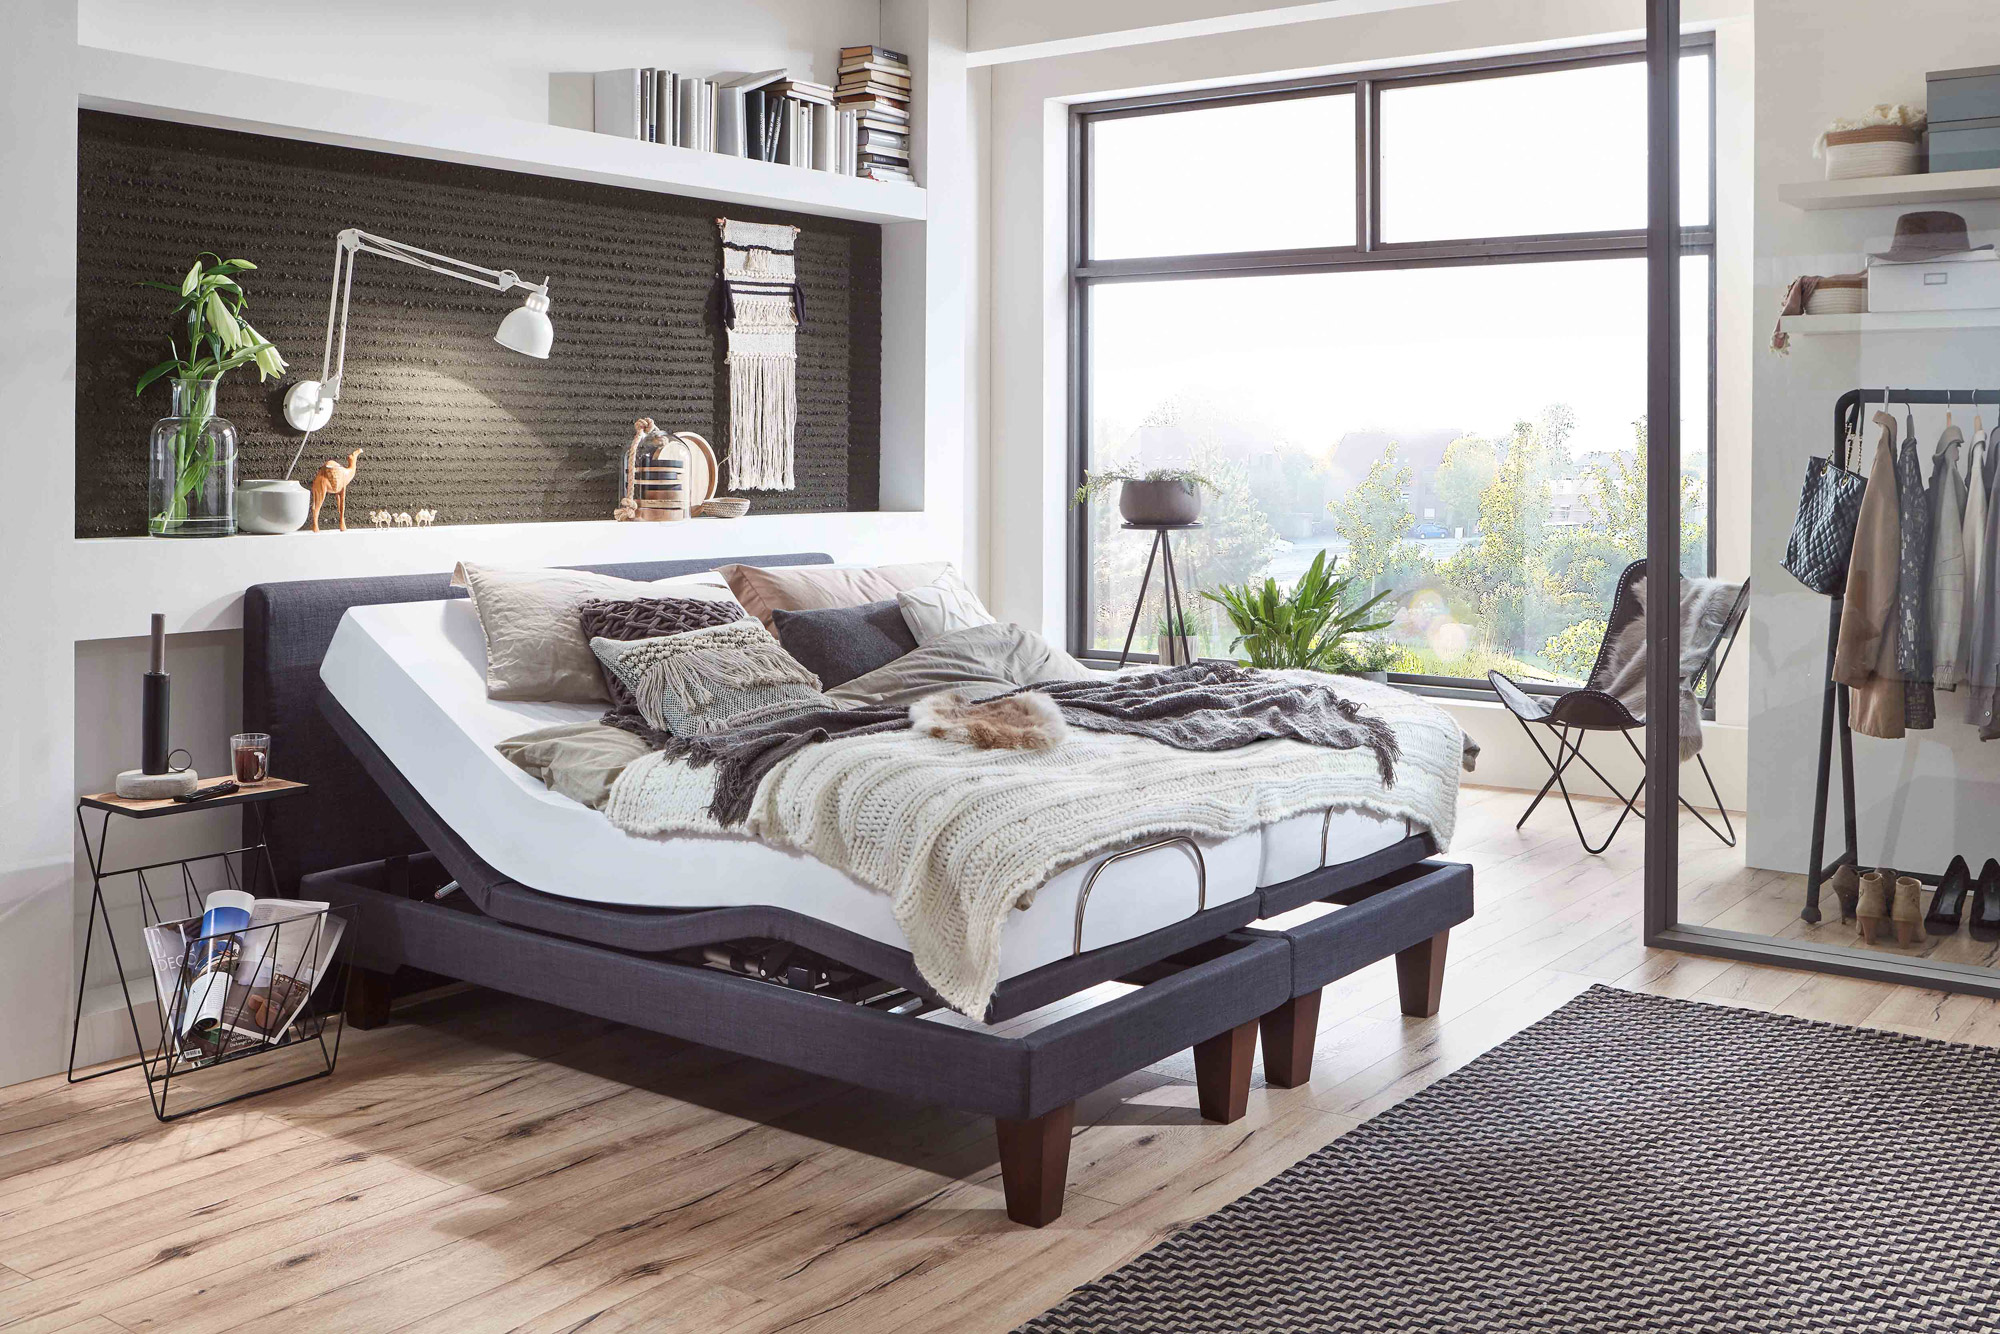 Why Are Adjustable Beds Considered As Stress Busters?